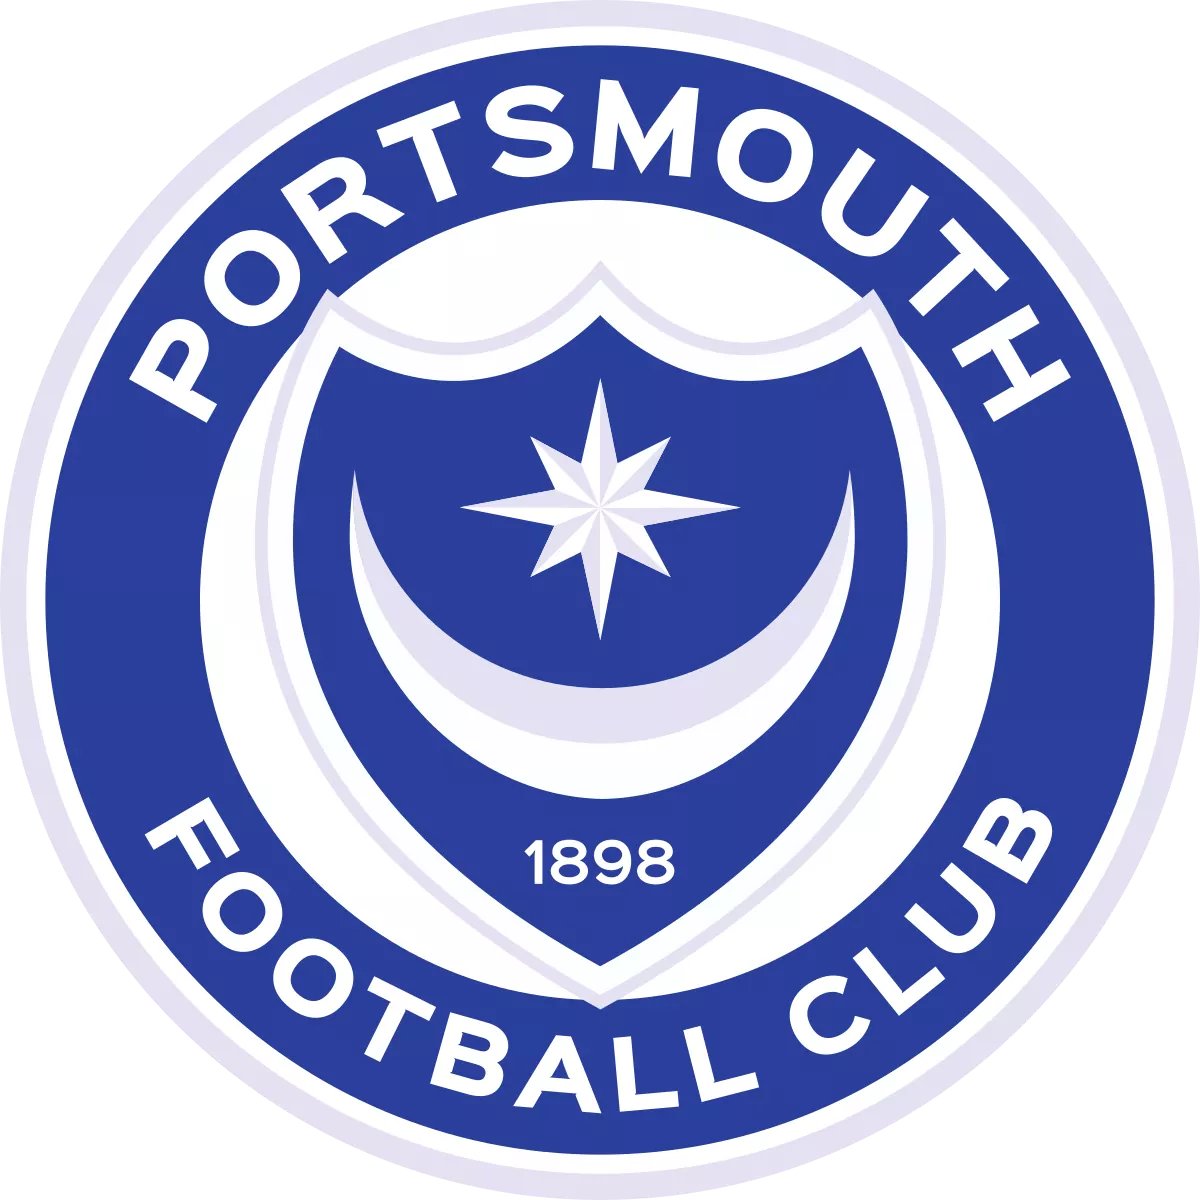 22) Portsmouth Points: 167 Manager: Kevin Russell Mason Mount and Alex Oxlade Chamberlain is the Mezzala duo from heaven. Seriously what a stacked central midfield. I have no idea who their only striker is though.